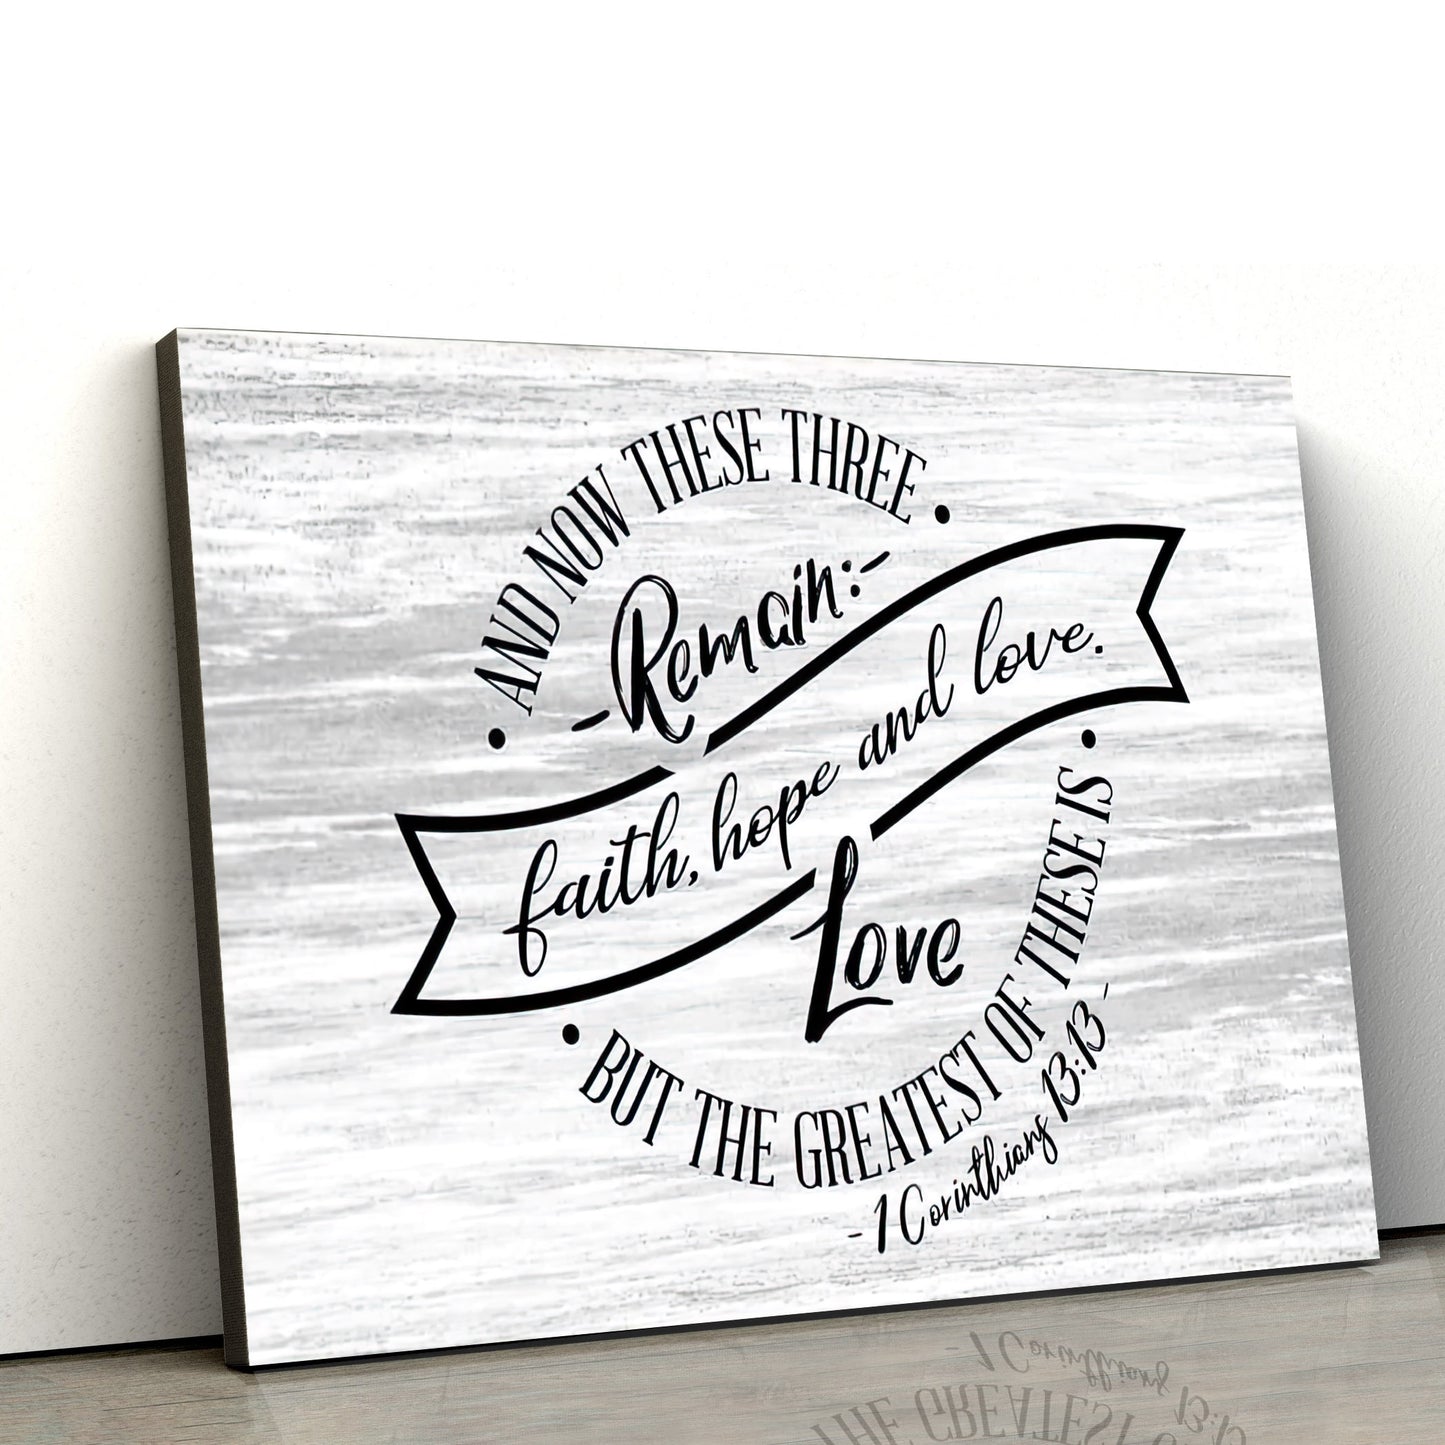 Faith Hope And Love Poster Canvas - 1 Corinthians 13 13 Hanging Art #4